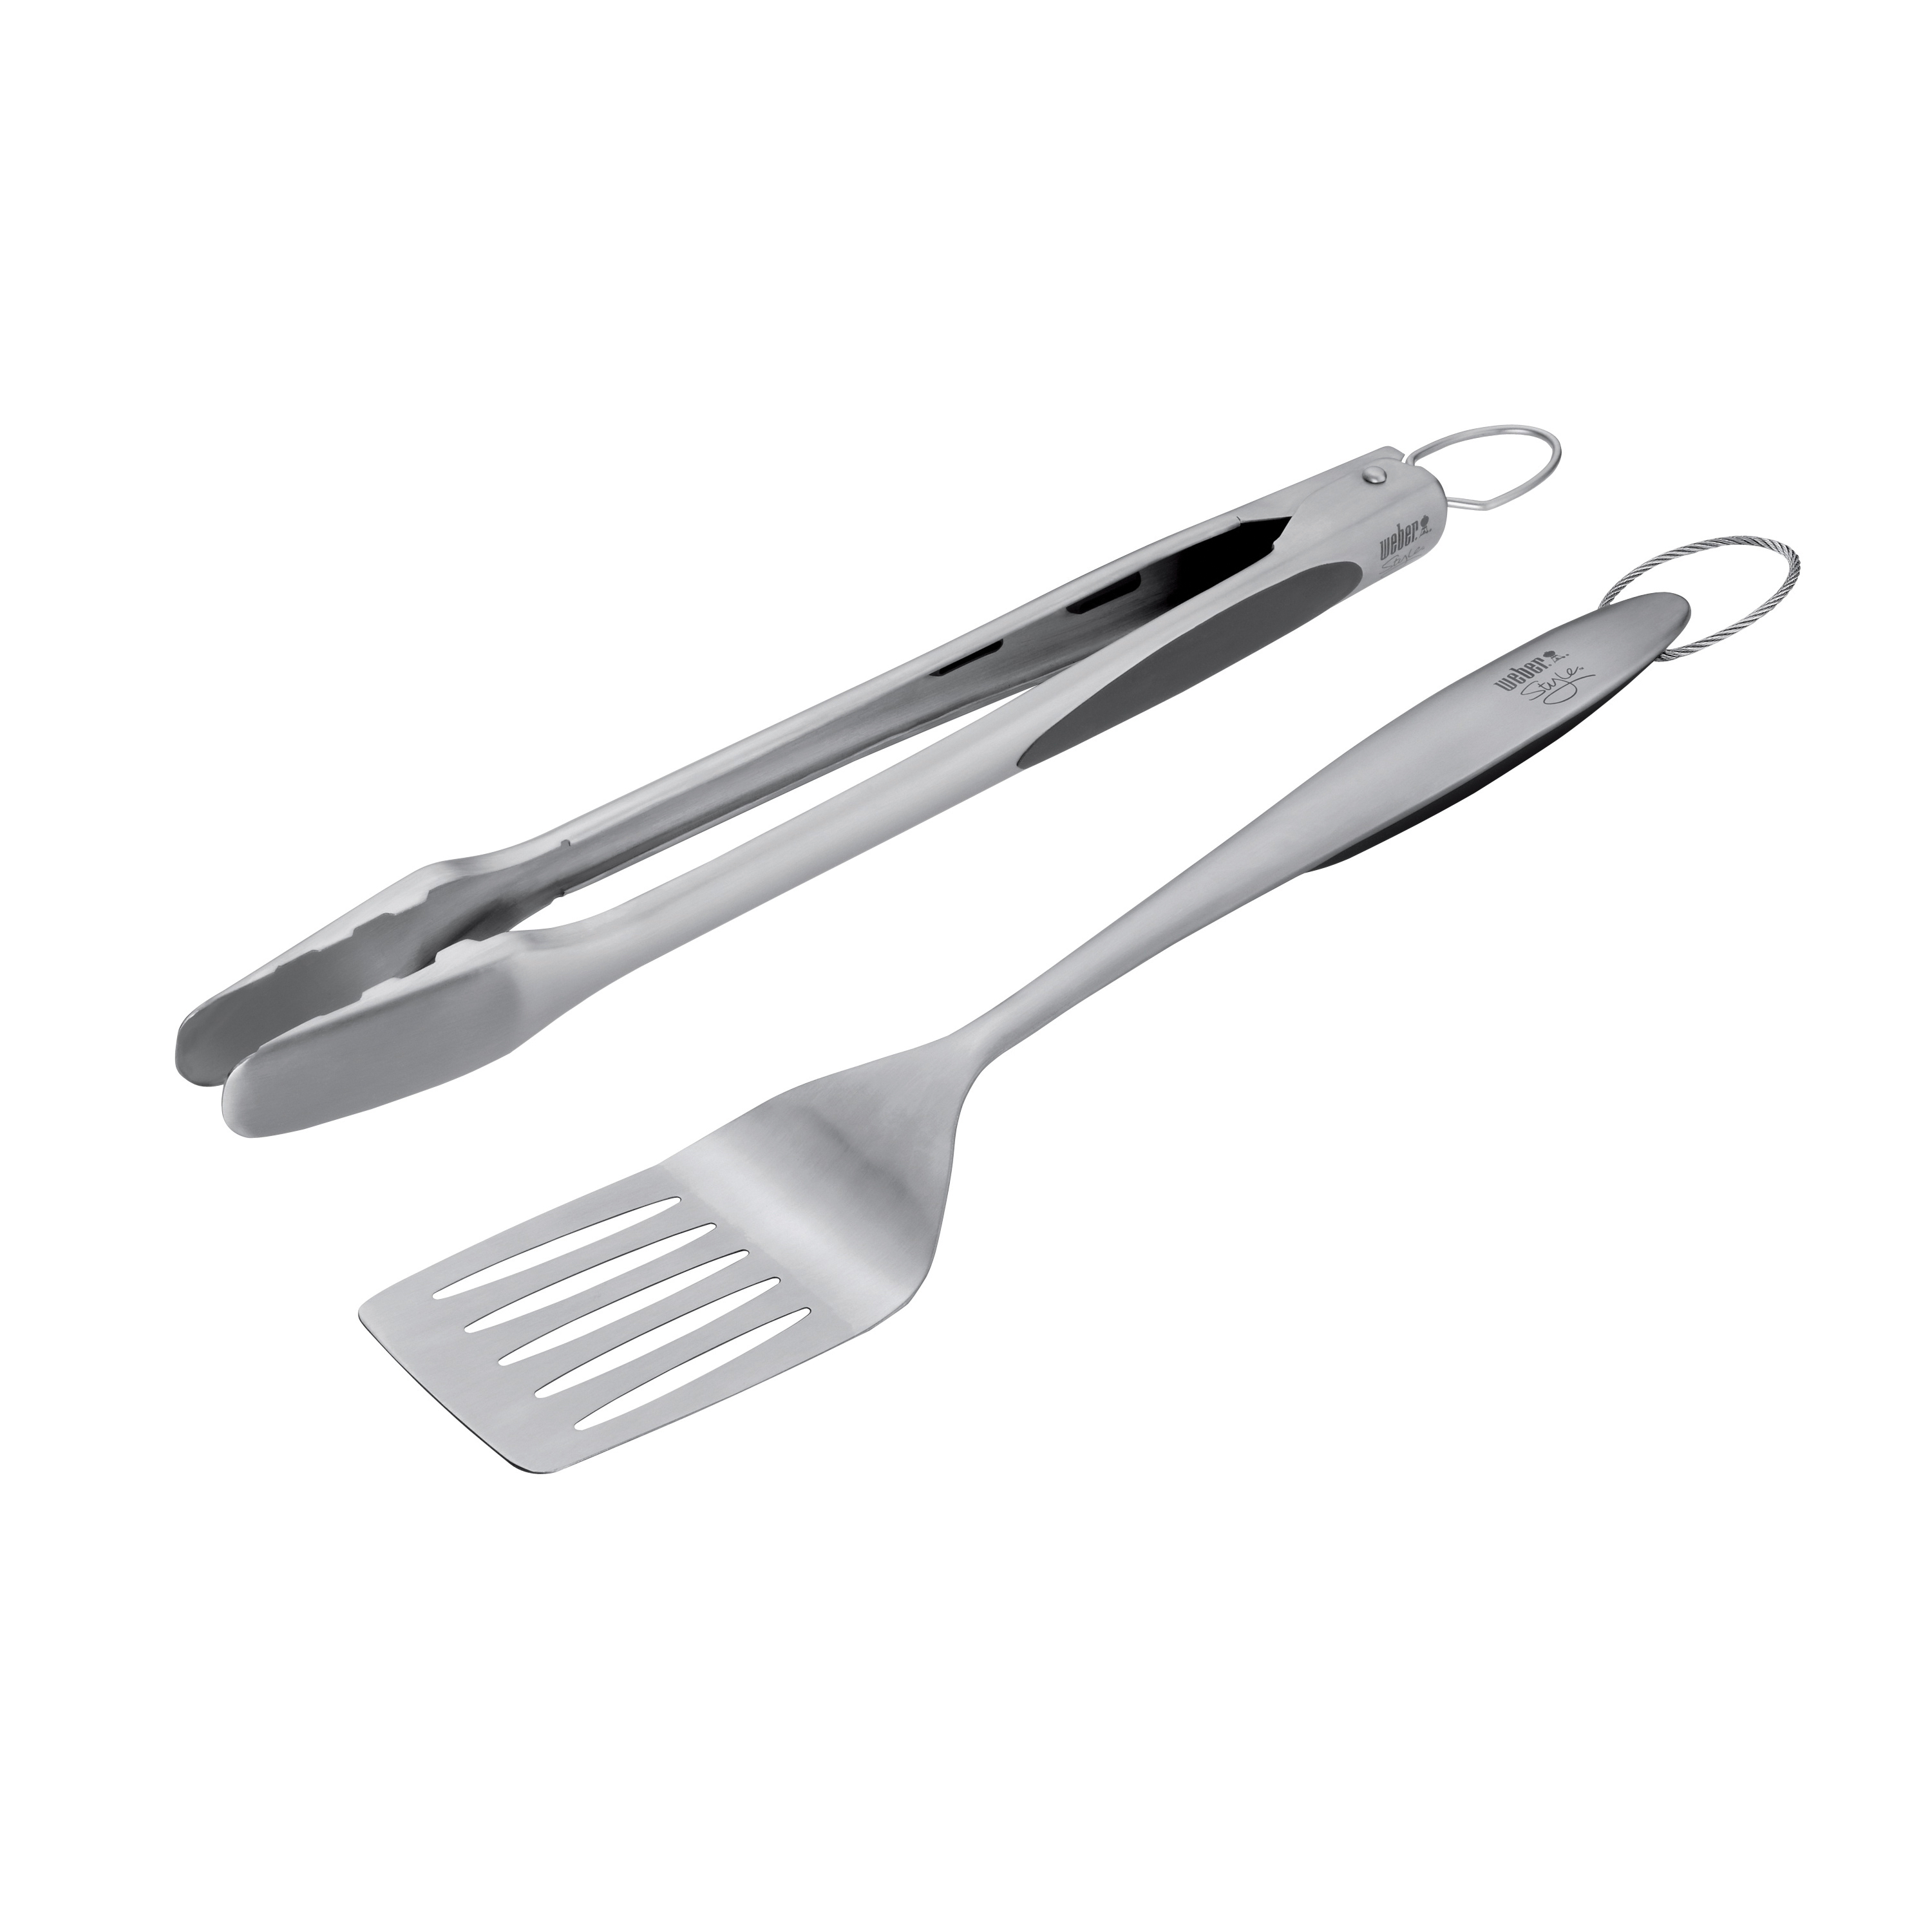 Omaha Sbq318-3-b Barbecue Tool Set with Handle and Hanger, Stainless Steel, 3